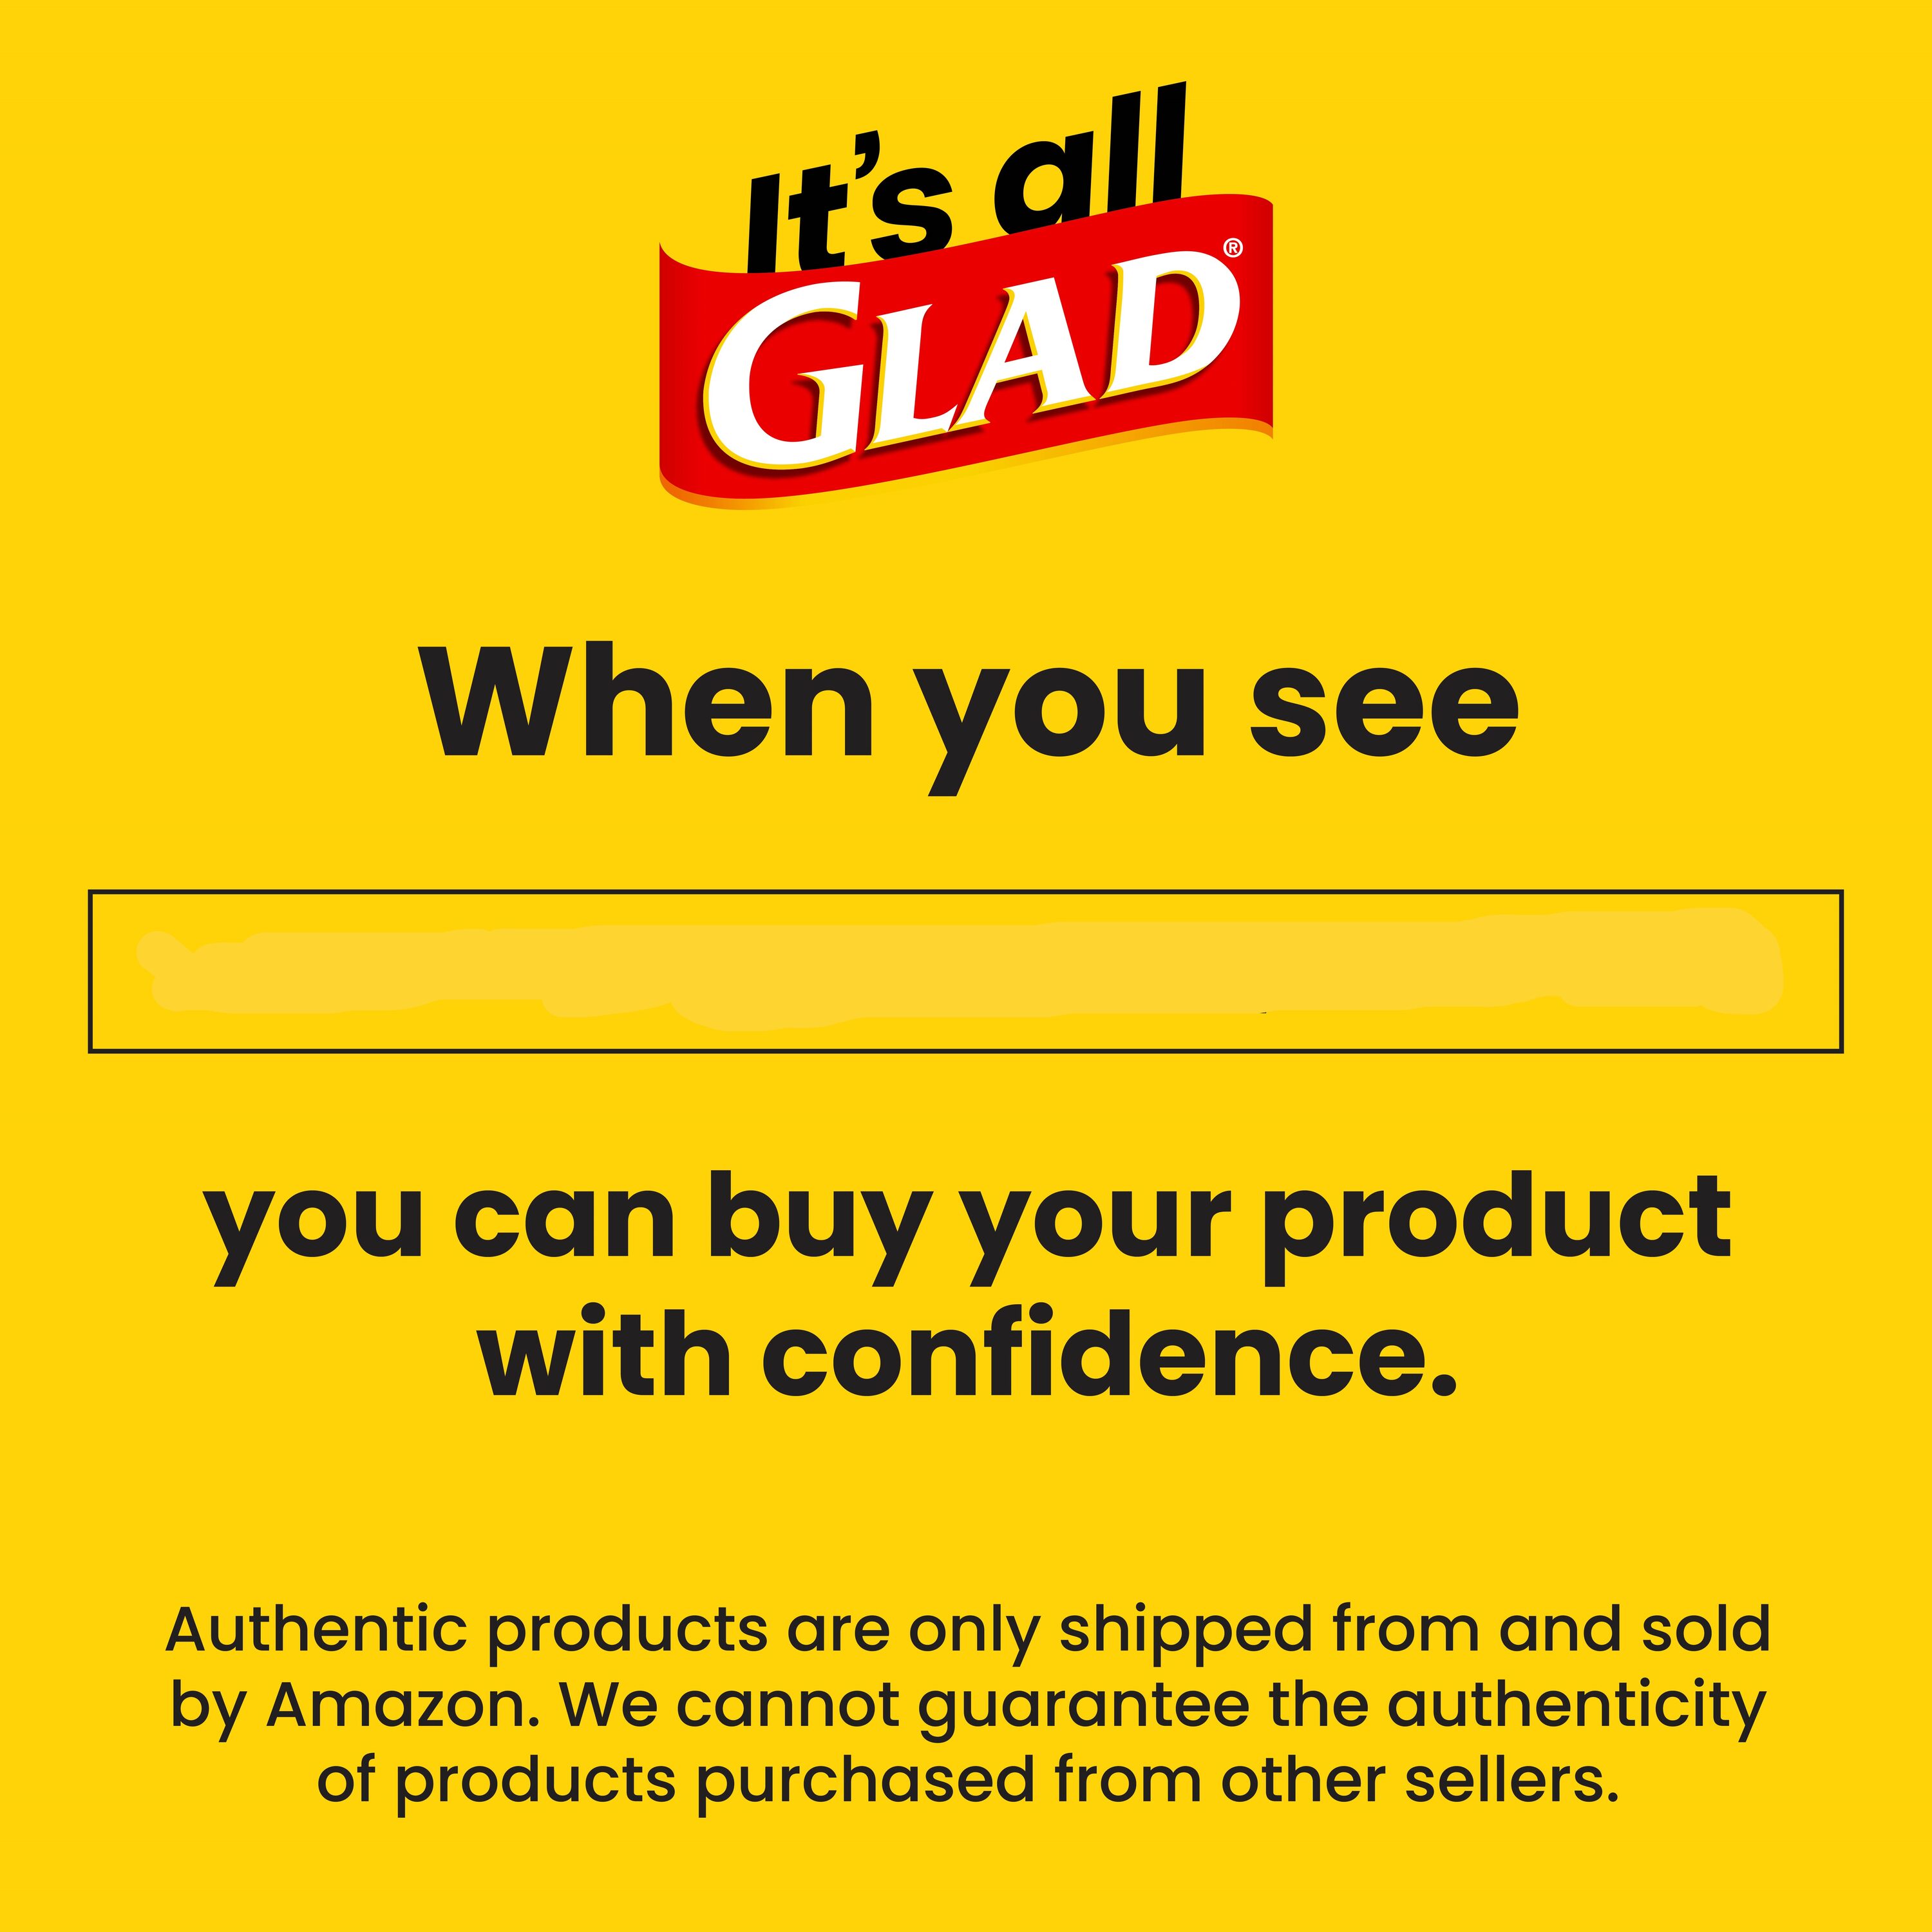 Buy Glad Everyday Disposable Cups 18 Oz., Red